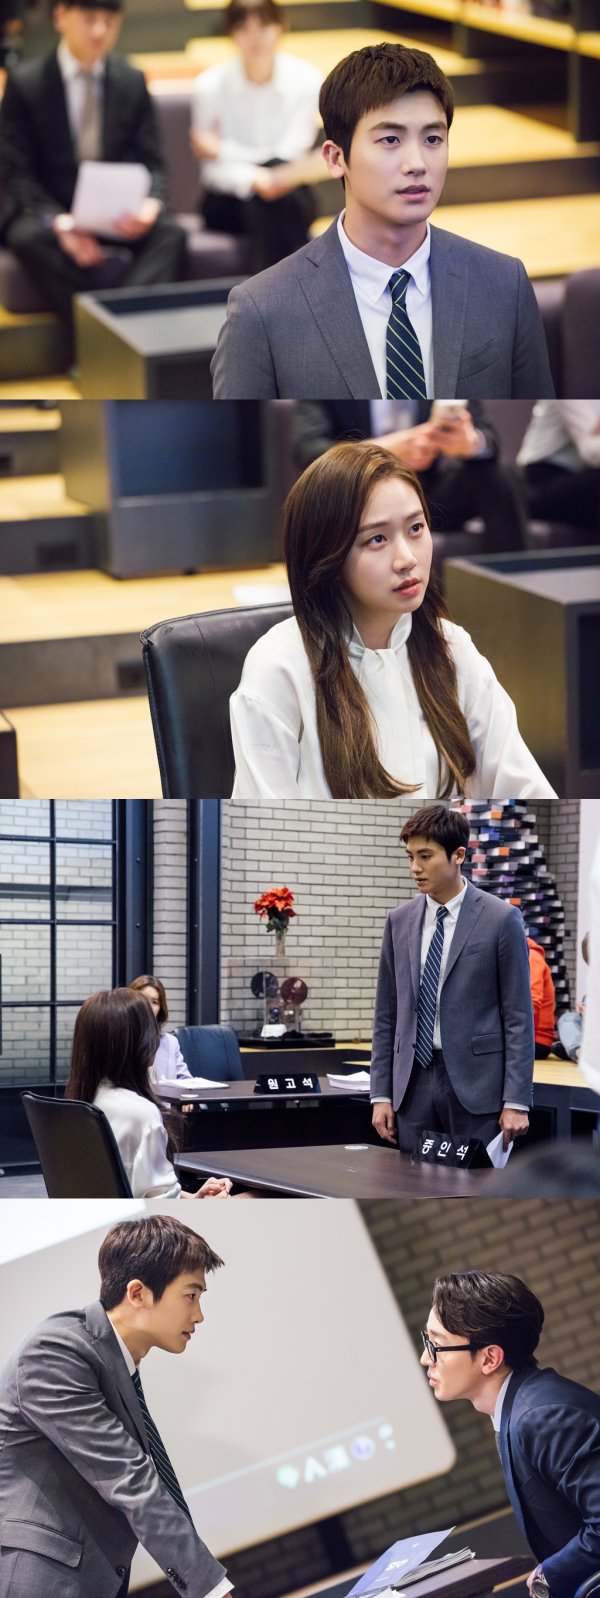 Park Hyung-sik and Ko Sung-hee stood on the other side.The point of fun that you can never miss in KBS 2TVs Drama Suits (playplayed by Kim Jung-min) is Chemi, who does not know where to go.I thought it was a mentor and a mentee, but I thought it was a tit-for-tat and a colleague, but Irreplaceable You Chemie, a hunched Tom and Jerry, is filling the play.These relationships are organically combined with stories and give unexpected fun.The representative of Irreplaceable You Chemi of Suits is the relationship between Park Hyung-sik and Ko Sung-hee.Although Ko Yeon-woo did not recognize it, the relationship between those who had been twisted properly since the first meeting was changed to familiarity with the secrets of each other.And as I do not know, I have been able to get a subtle feeling, and it gives a variety of feelings such as excitement to the viewers in front of the TV.The two men were on the other side of the Suits episode, which aired on the 9th, although it is the Moot court.The new lawyers have a great chance to verify their abilities. Kim Ji-na has become a team with Ko Yeon-woos opponents lawyer, not Ko Yeon-woo, because of a small misunderstanding.There is a growing interest in whether Ko Yeon-woo can push Kim Ji-na and how the relationship between the two will change with the Moot court.Meanwhile, on the 10th, the production team of Suits released the images of the two people standing on the other side of the Moot Court ahead of the 6th broadcast.Moot court, but as a lawyer with his feelings hidden in his expression, Kim Ji-na, who has to be questioned on the other side of such a lawyer,The serious expression of the two people, the atmosphere of subtle emotions that seem to happen at any moment, stimulates the curiosity.The six mot courts broadcast on the 10th will have a great impact on Ko Yeon-woo and Kim Ji-na in many ways.Two people who are close to the secret Gong Yoo will clearly realize their situation through the Moot court.Of course, this is also related to the relationship between the two people who will change in the future.I would like to expect the intensive performance of Park Hyung-sik and Ko Sung-hee, who depicted this important scene. 